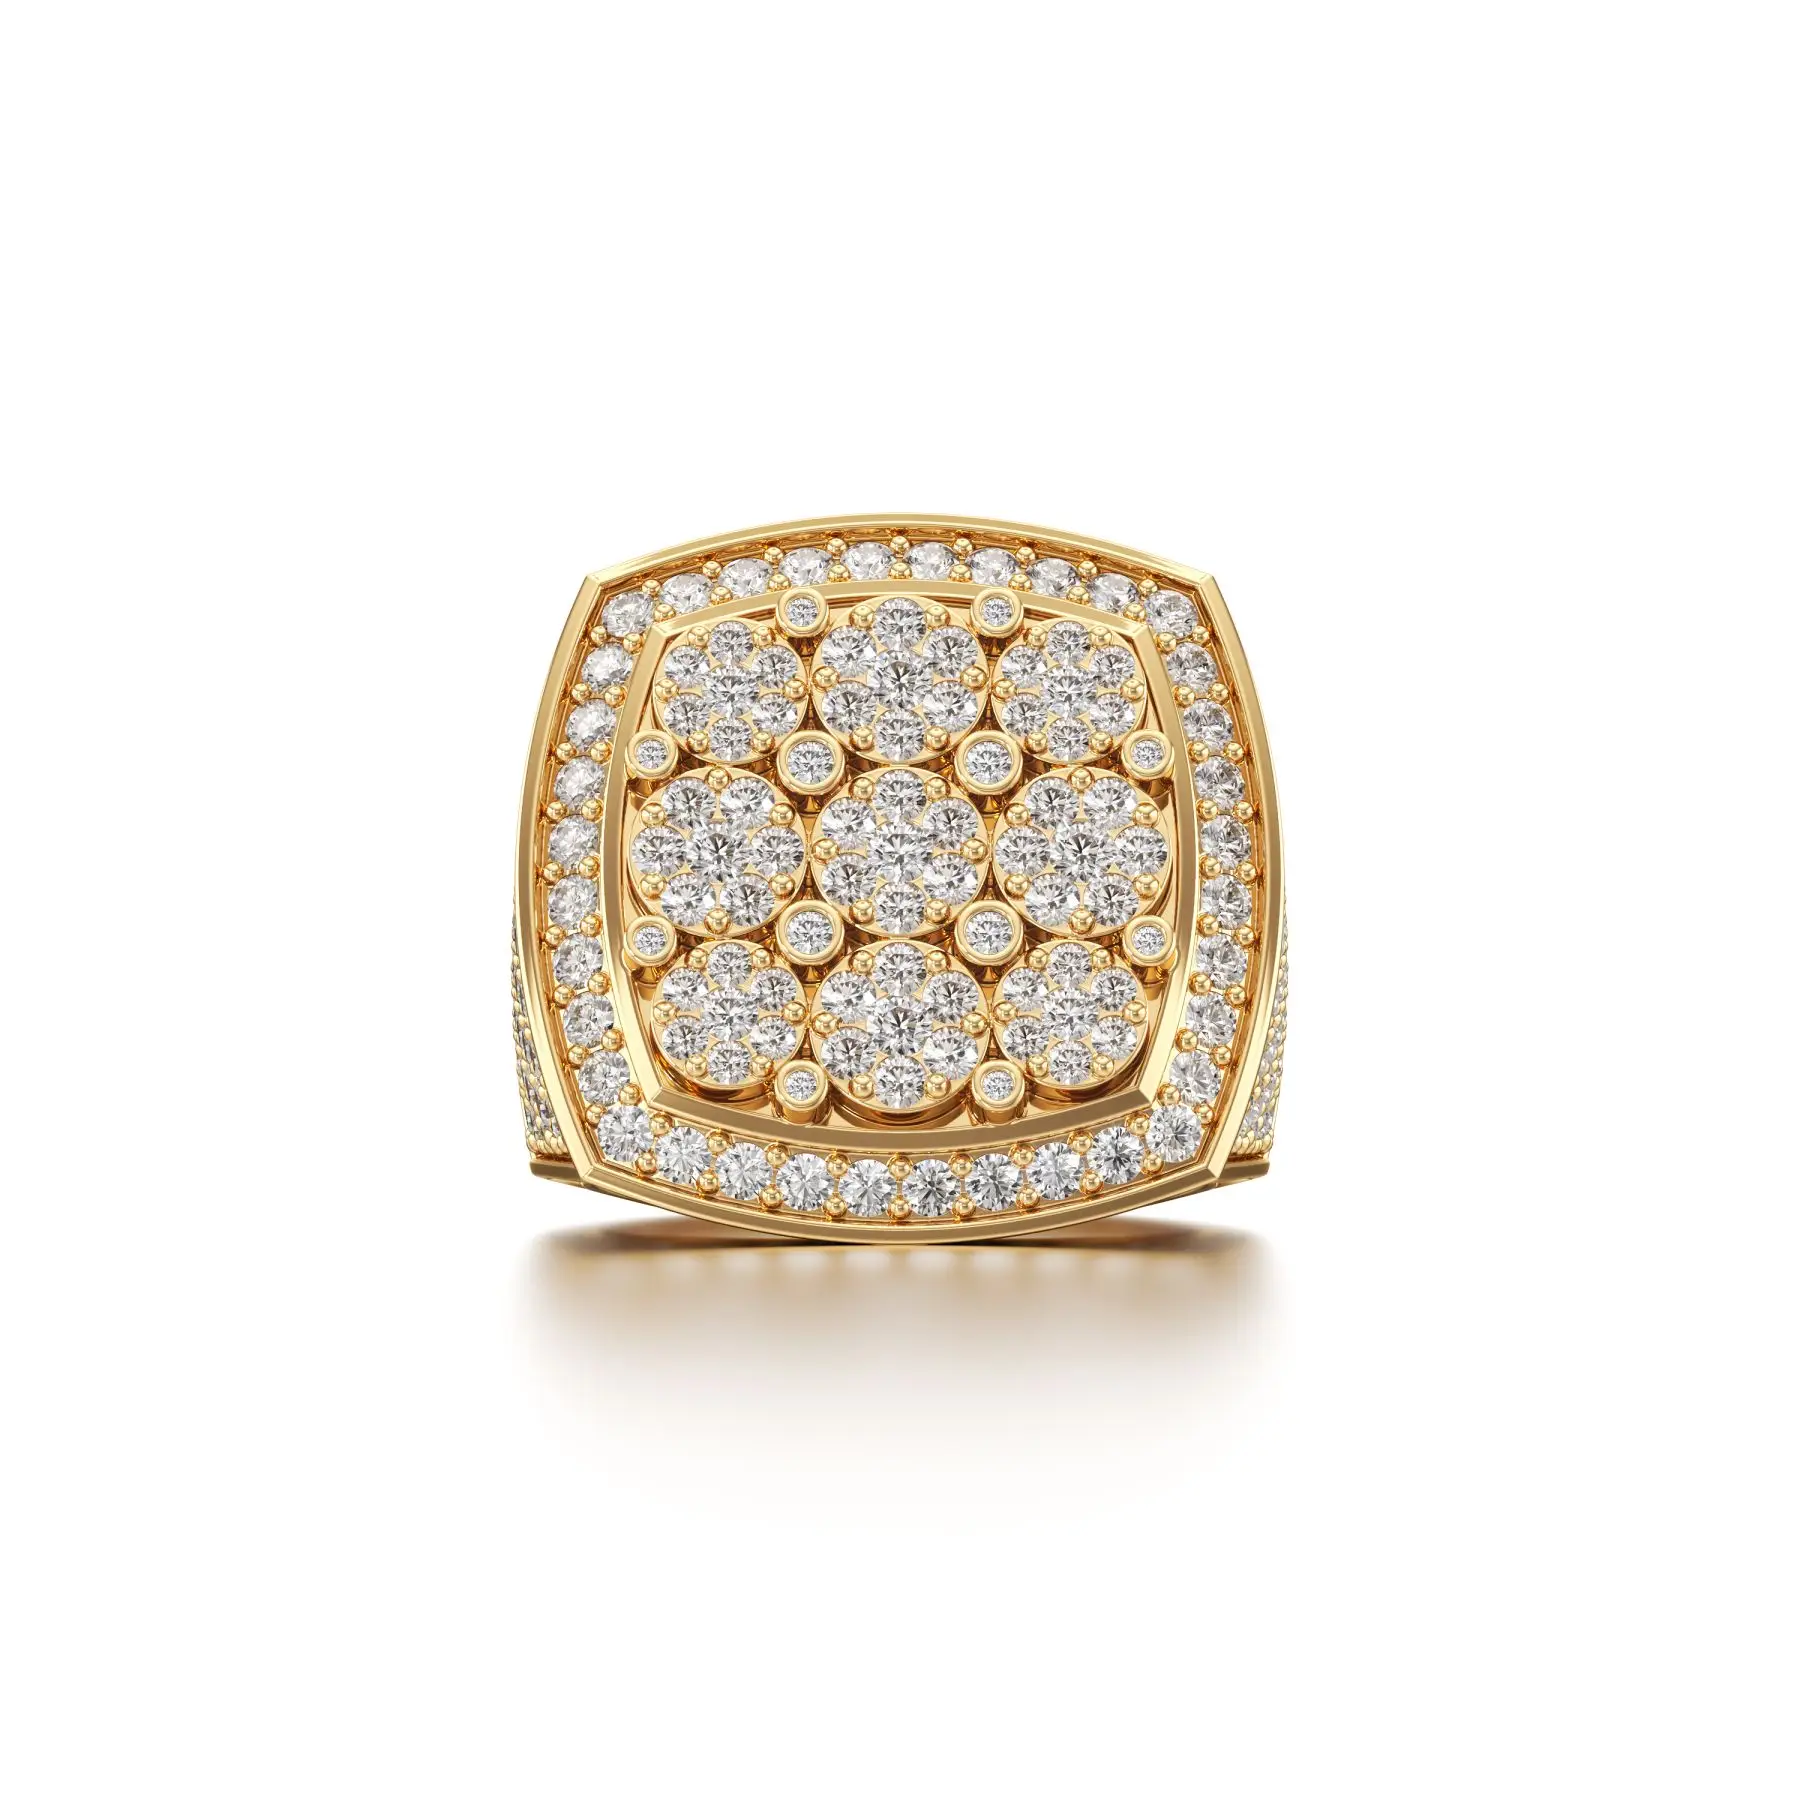 Dazzling Floral Cluster Diamond Ring in Yellow 10k Gold